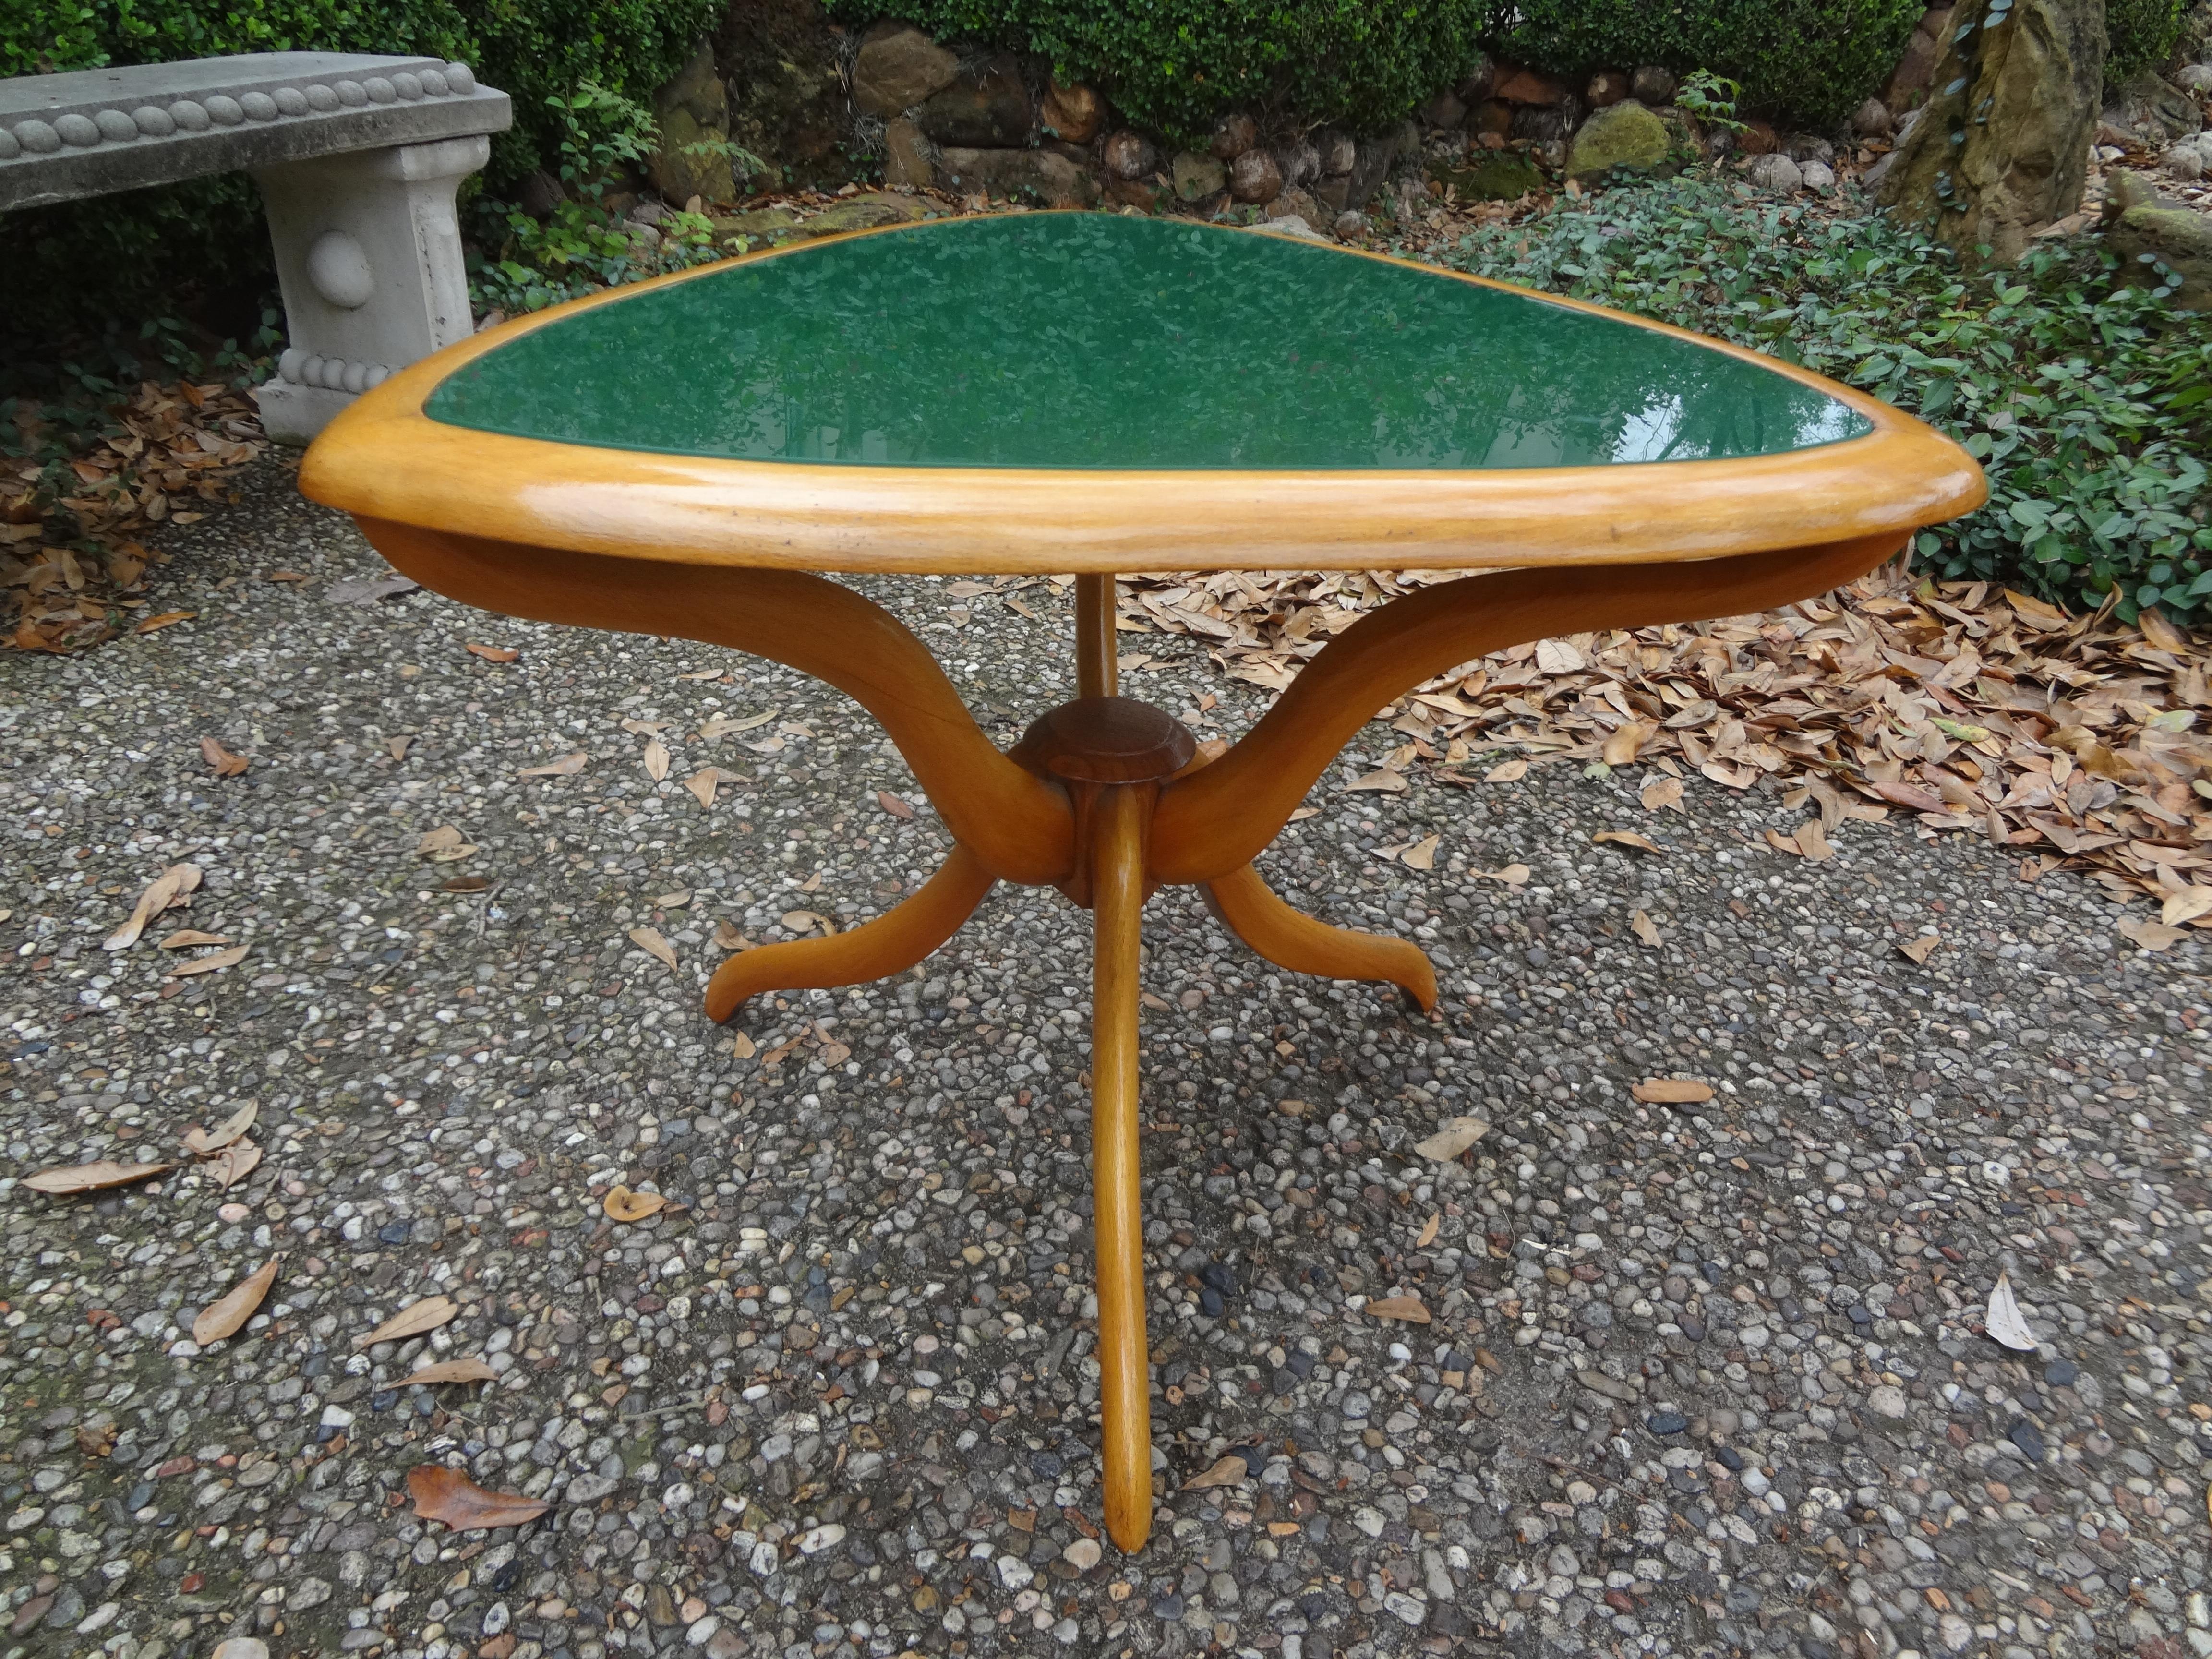 Italian modern Gio Ponti inspired table.
Stunning Italian modern Gio Ponti inspired table. This shapely Italian table was executed in sycamore with great lines and an unusual green glass top. Fantastic side table, gueridon, drinks table or cocktail